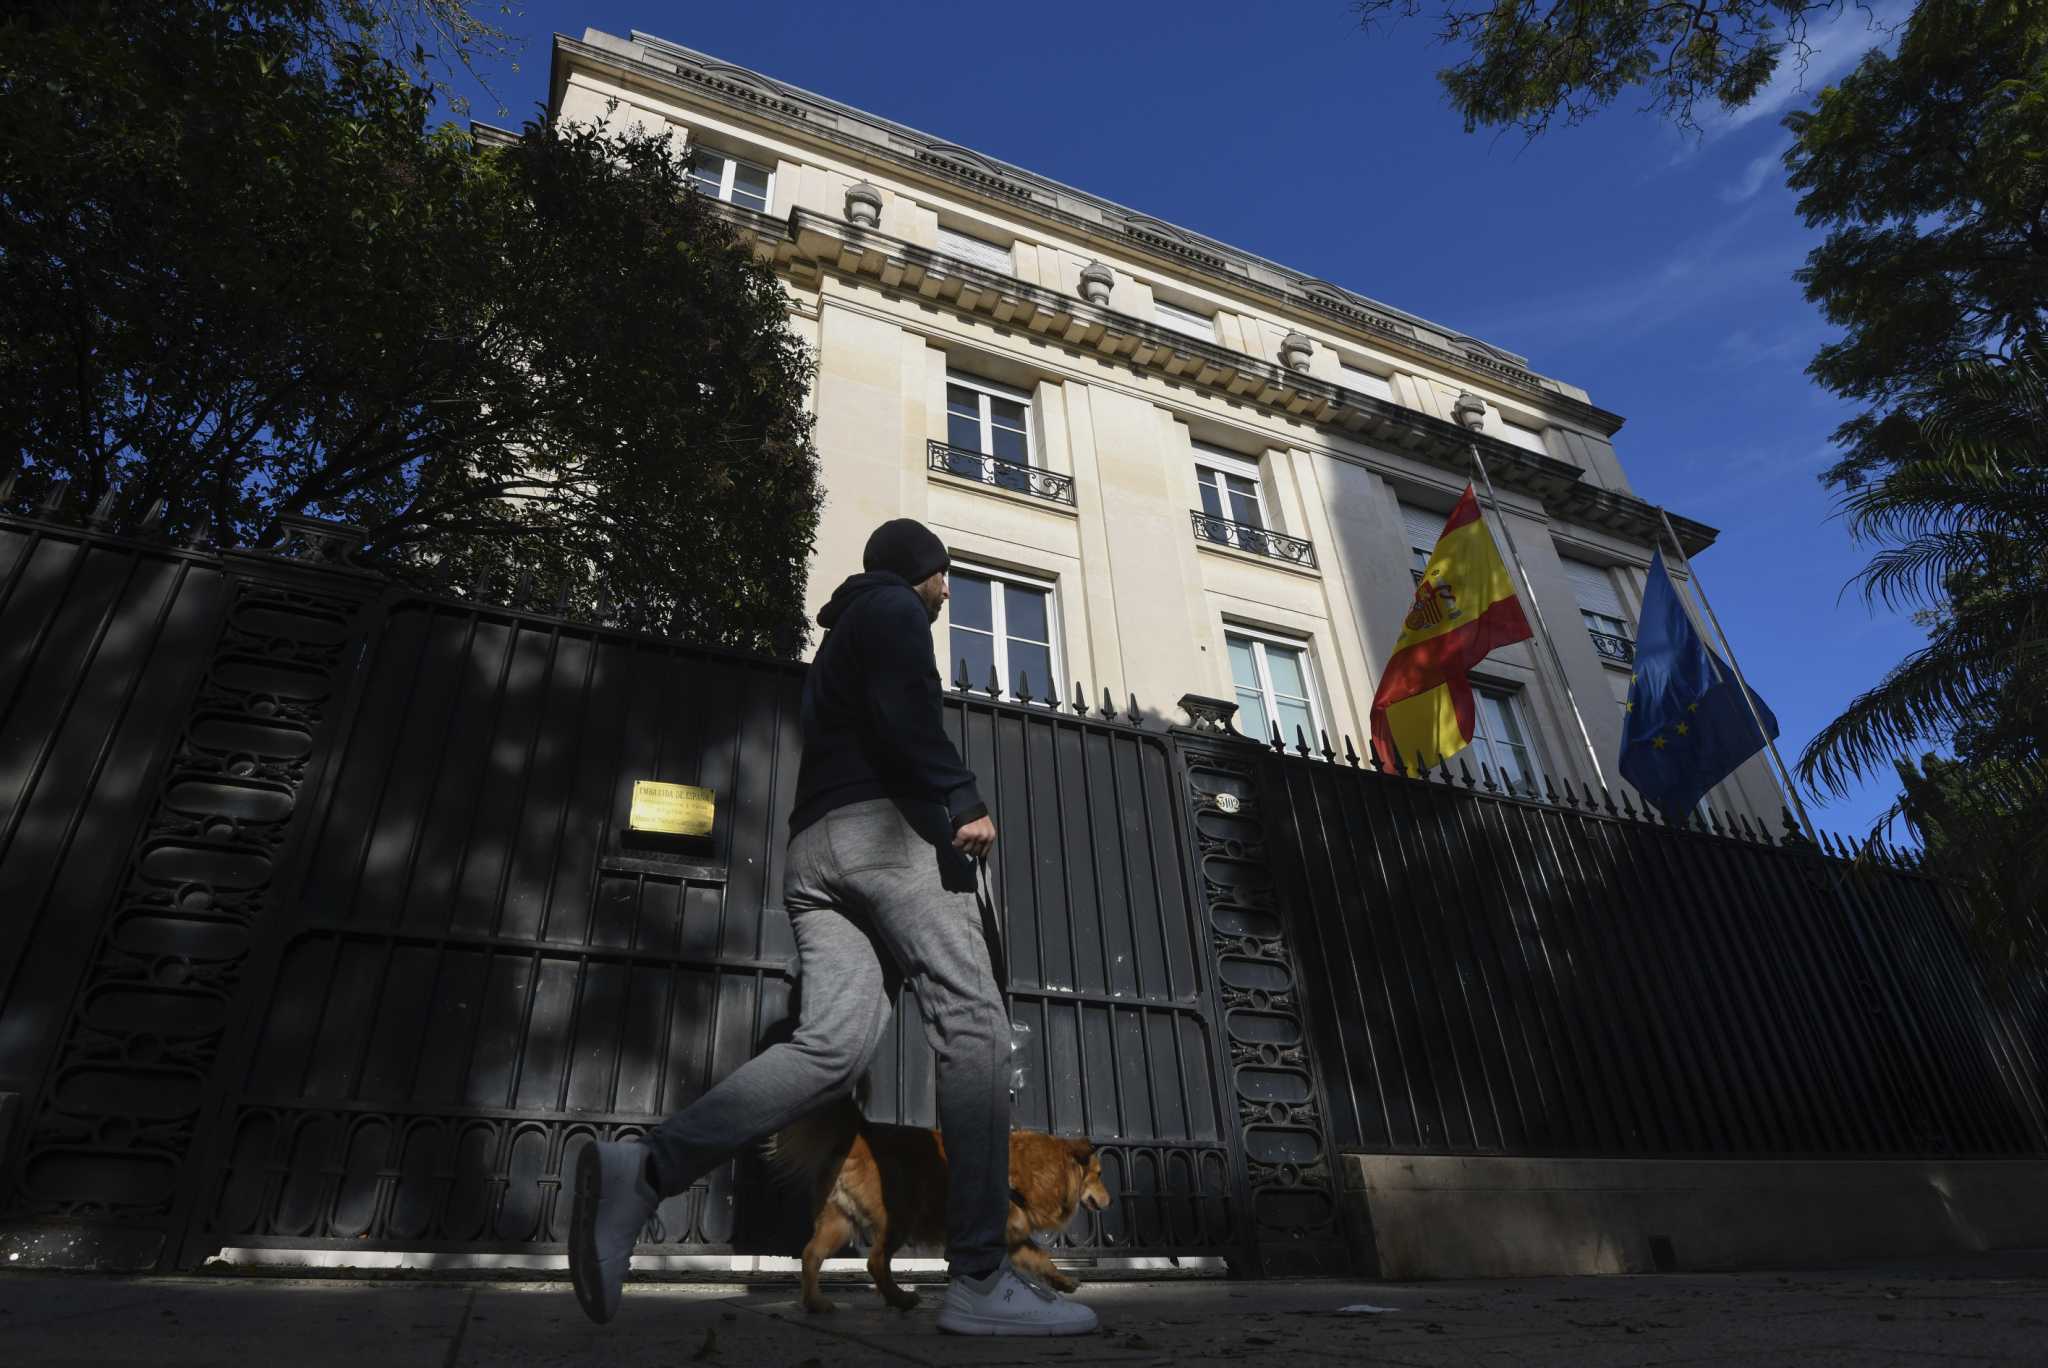 Spain withdraws its ambassador to Argentina over President Milei's insults, escalating crisis